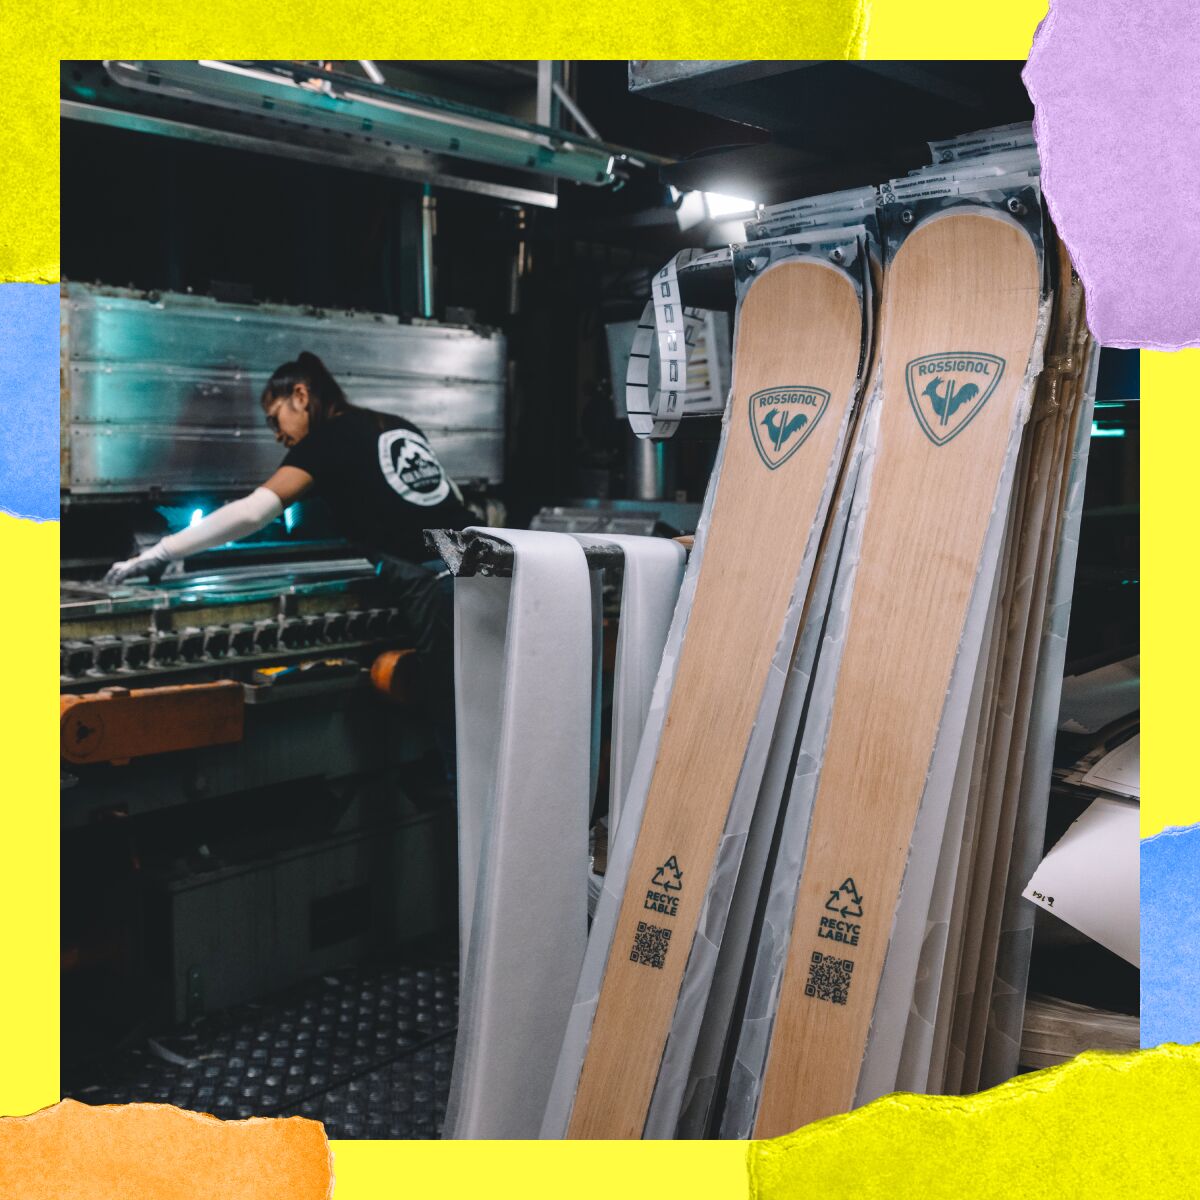 The Essential, 77% recyclable skis, will be available later this year.